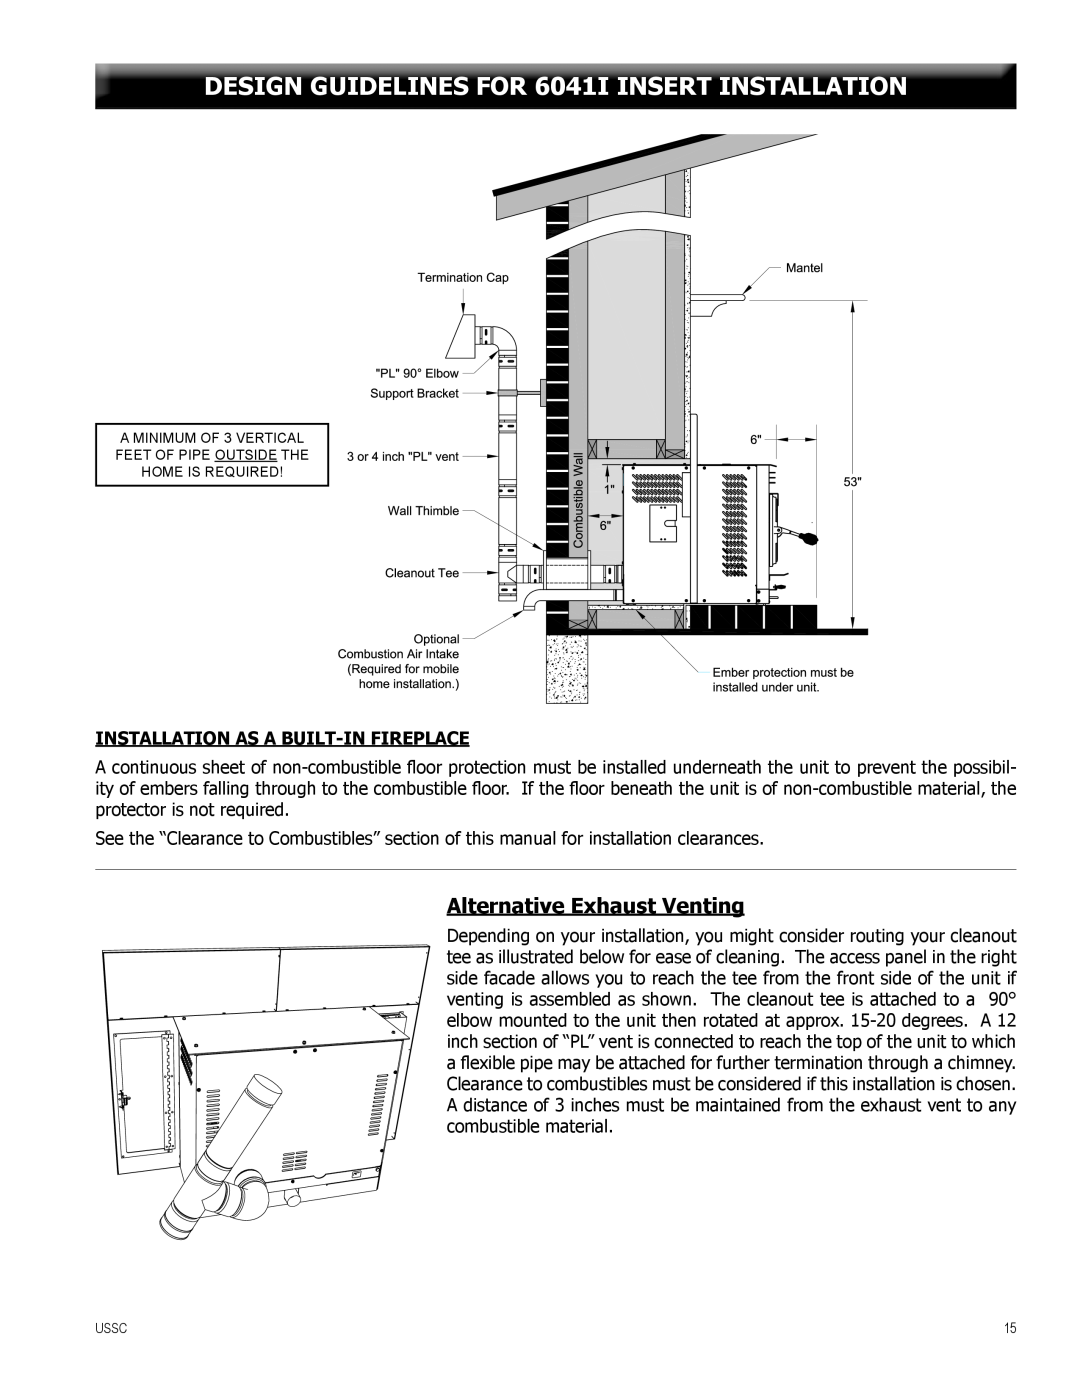 United States Stove 6041HF, 6041TP warranty DESIGN GUIDELINES FOR 6041I INSERT INSTALLATION, Alternative Exhaust Venting 